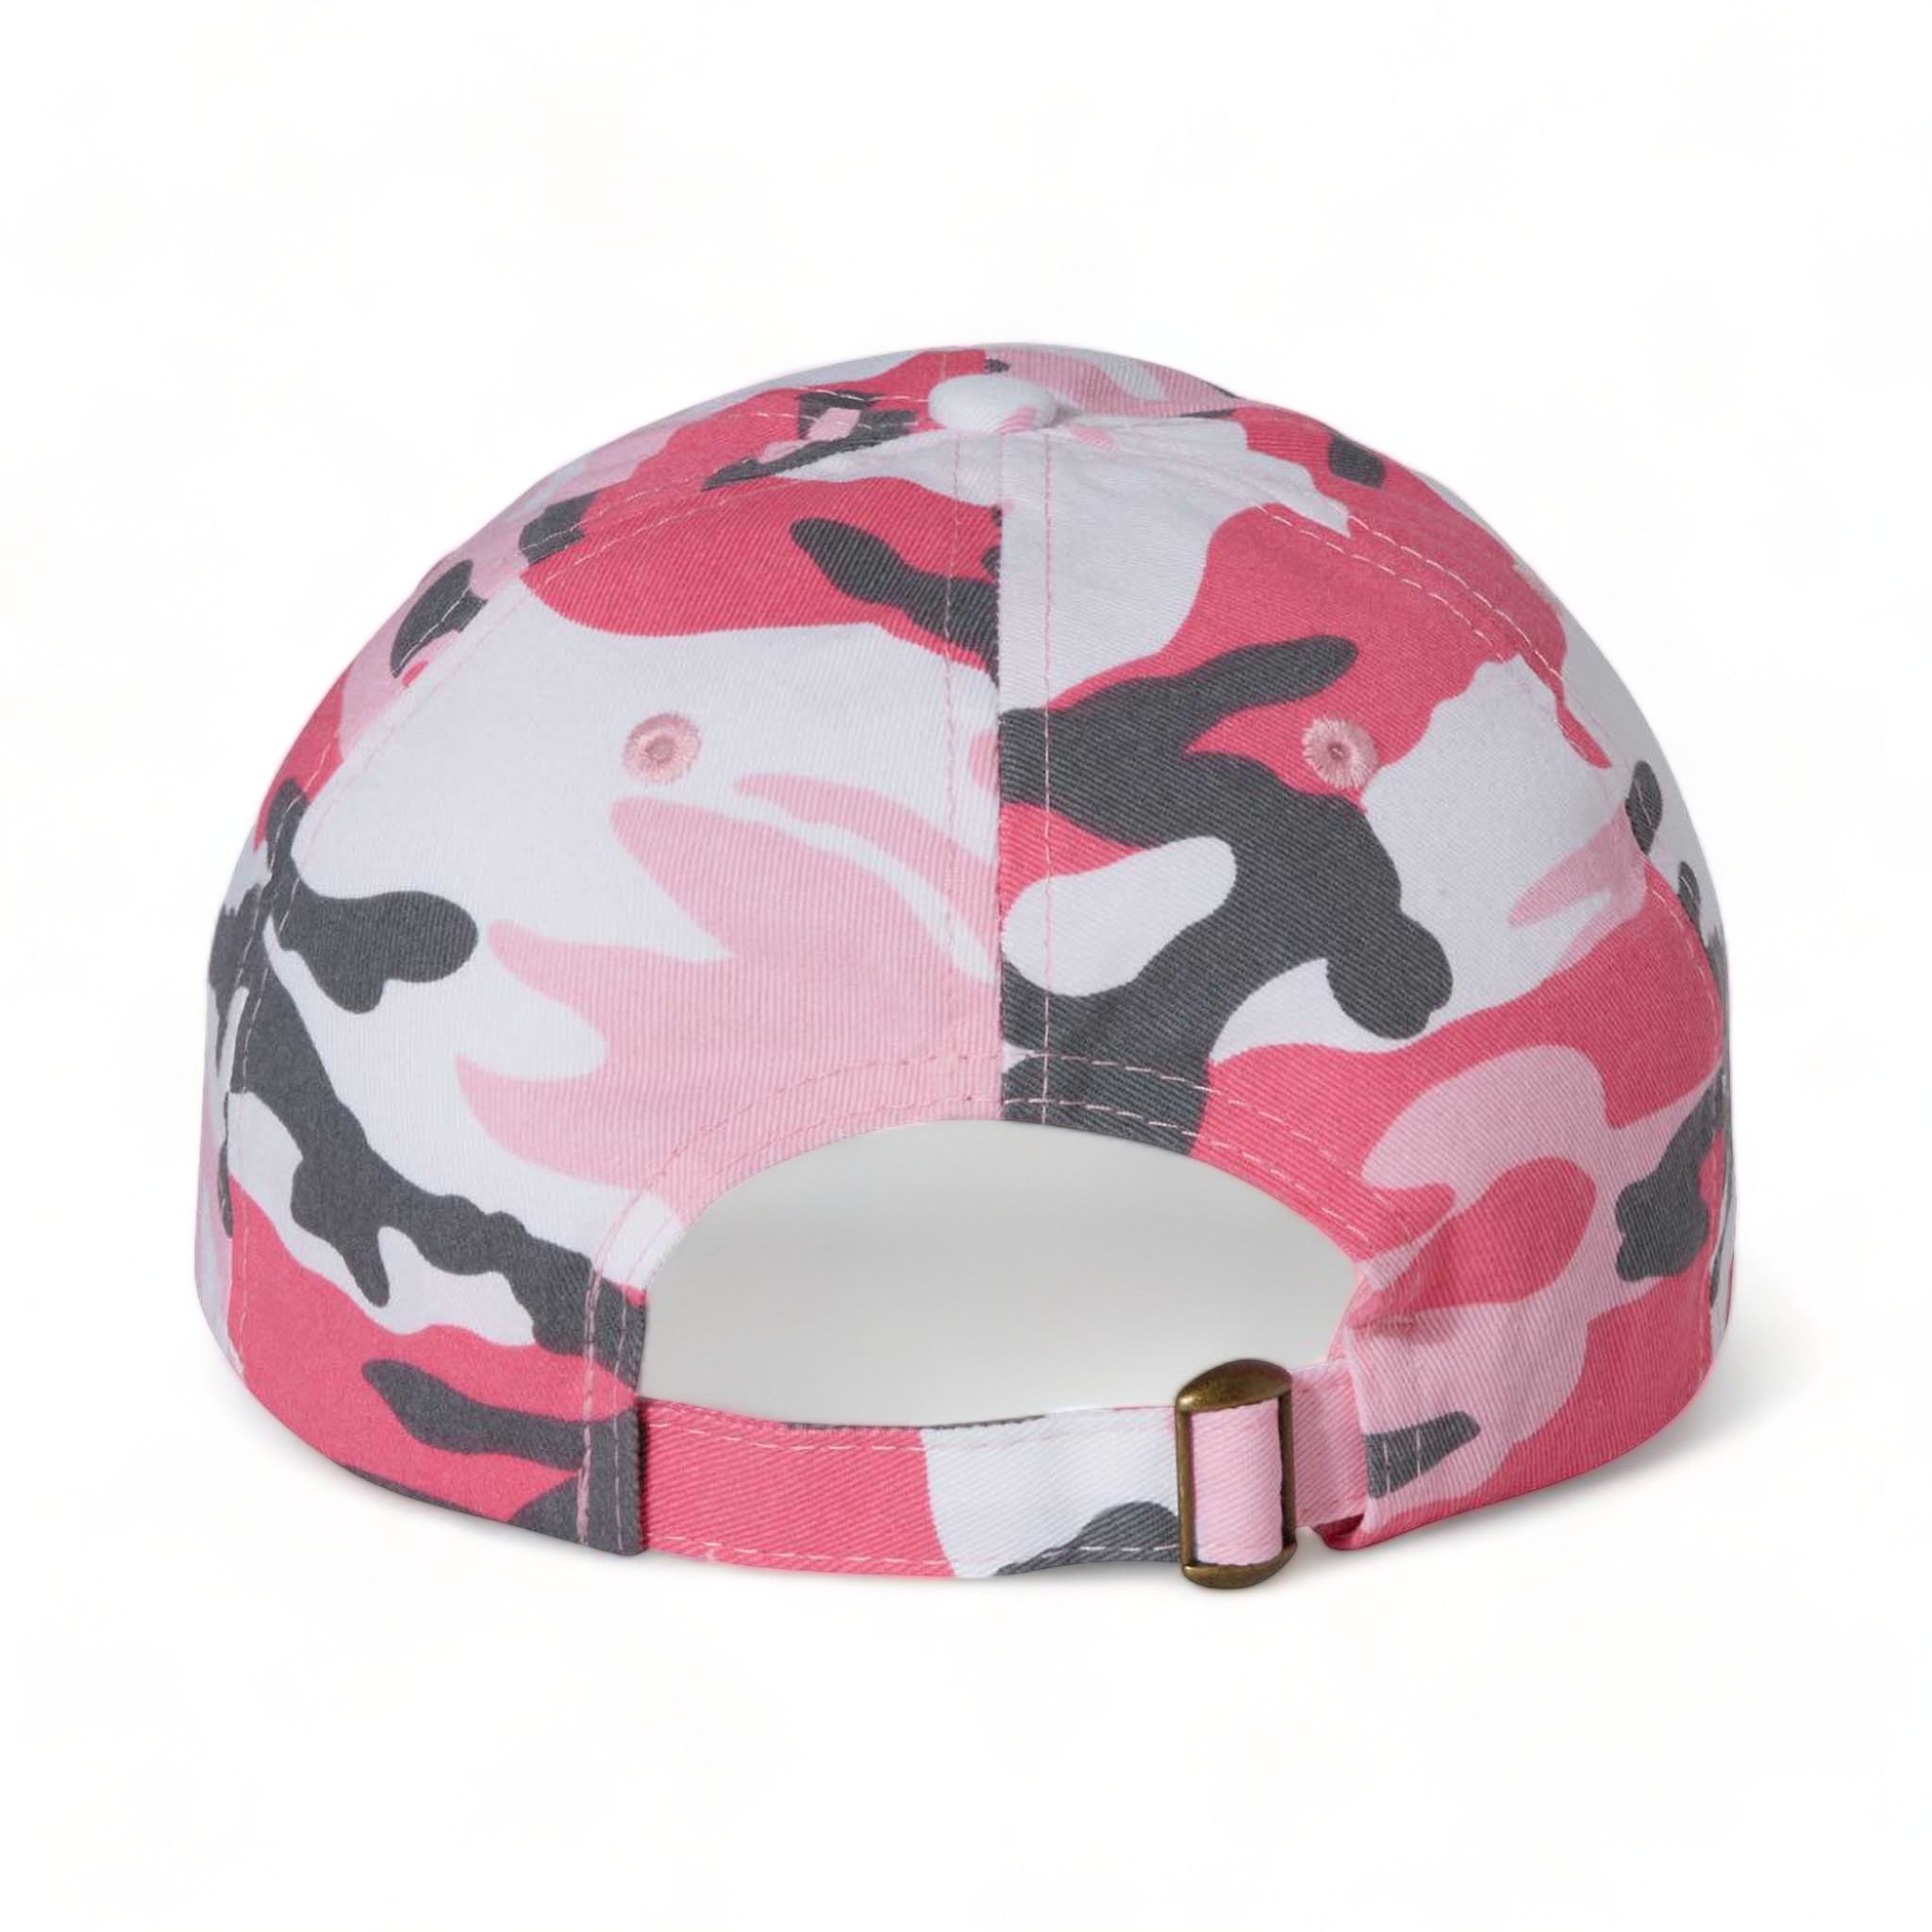 Back view of Valucap VC300A custom hat in pink camo